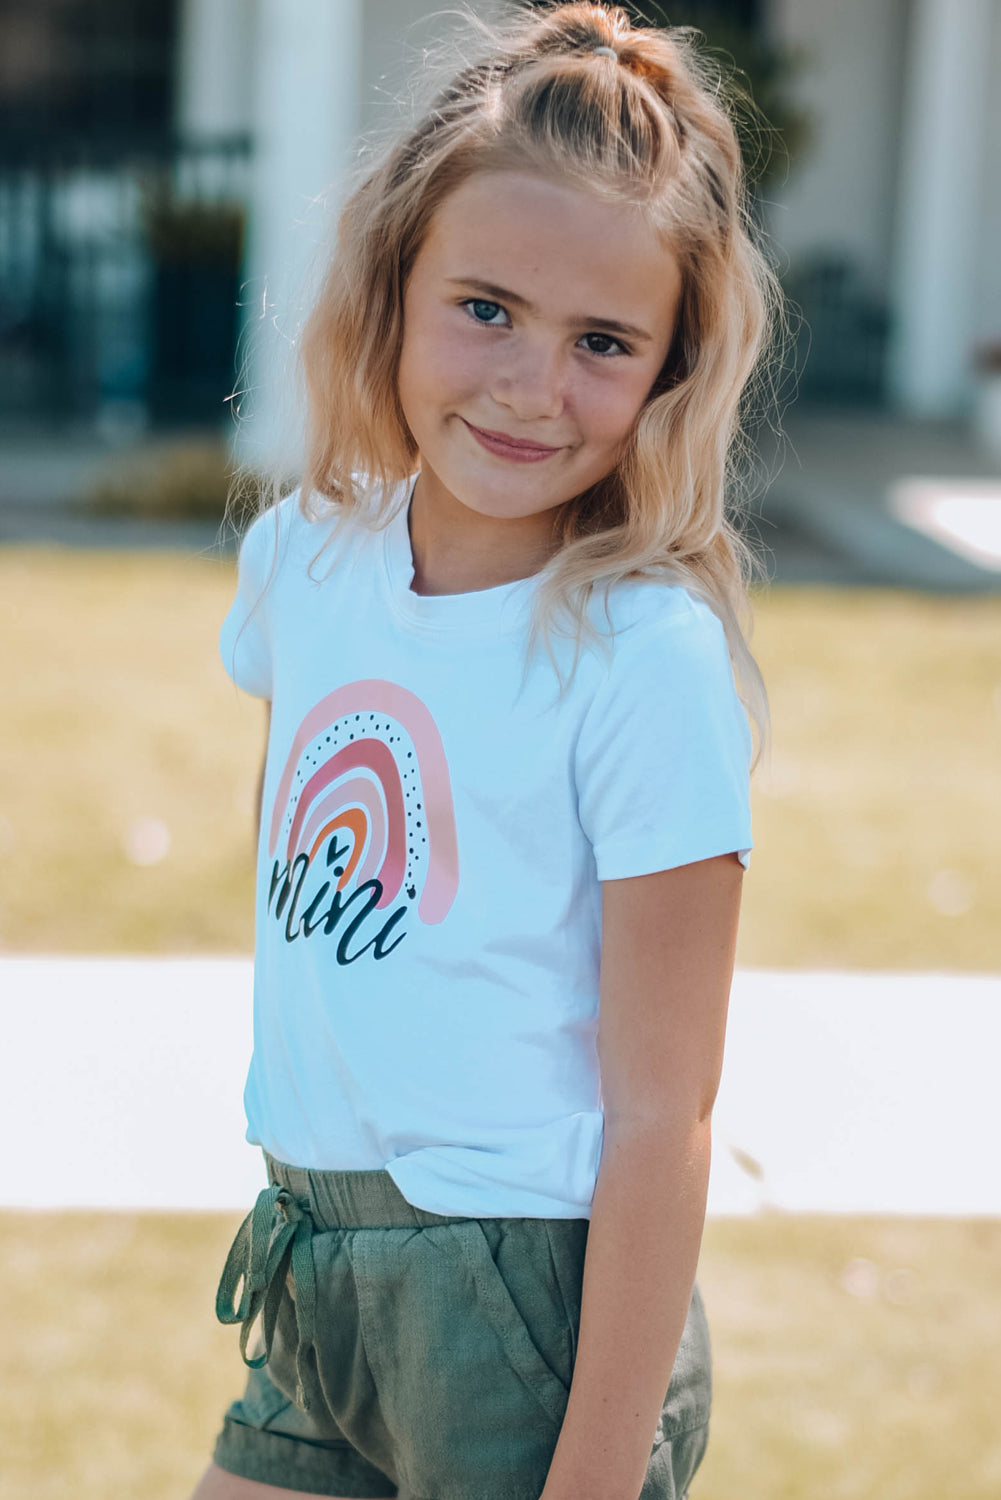 Uylee’s Boutique Girls Graphic Round Neck Tee Shirt (Mommy and Me Top)